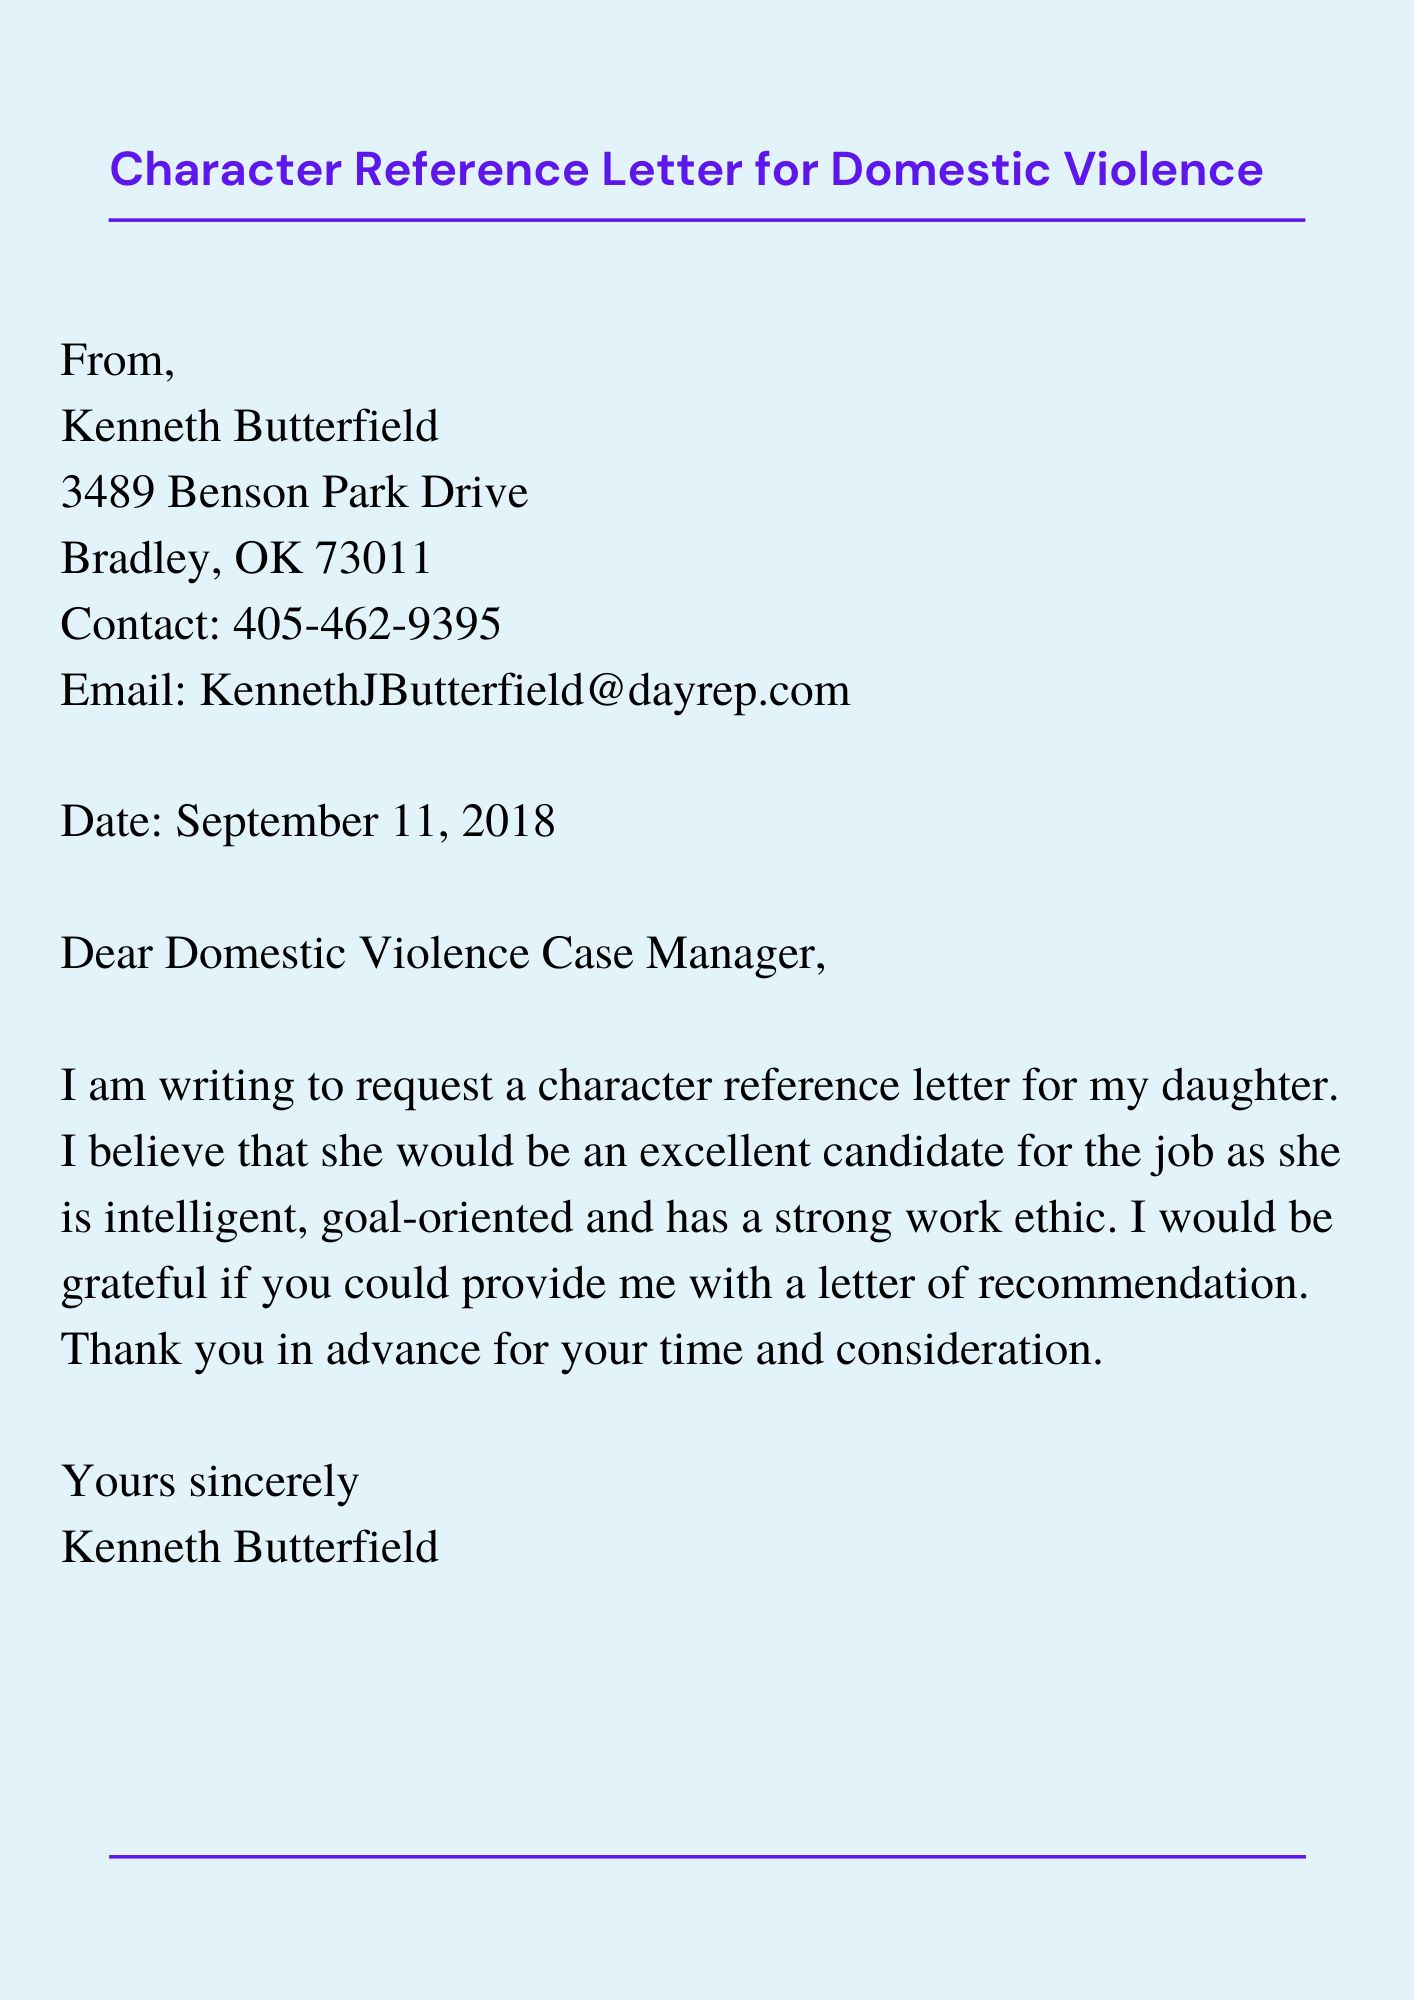 Sample Domestic Violence Character Reference Letter PDF